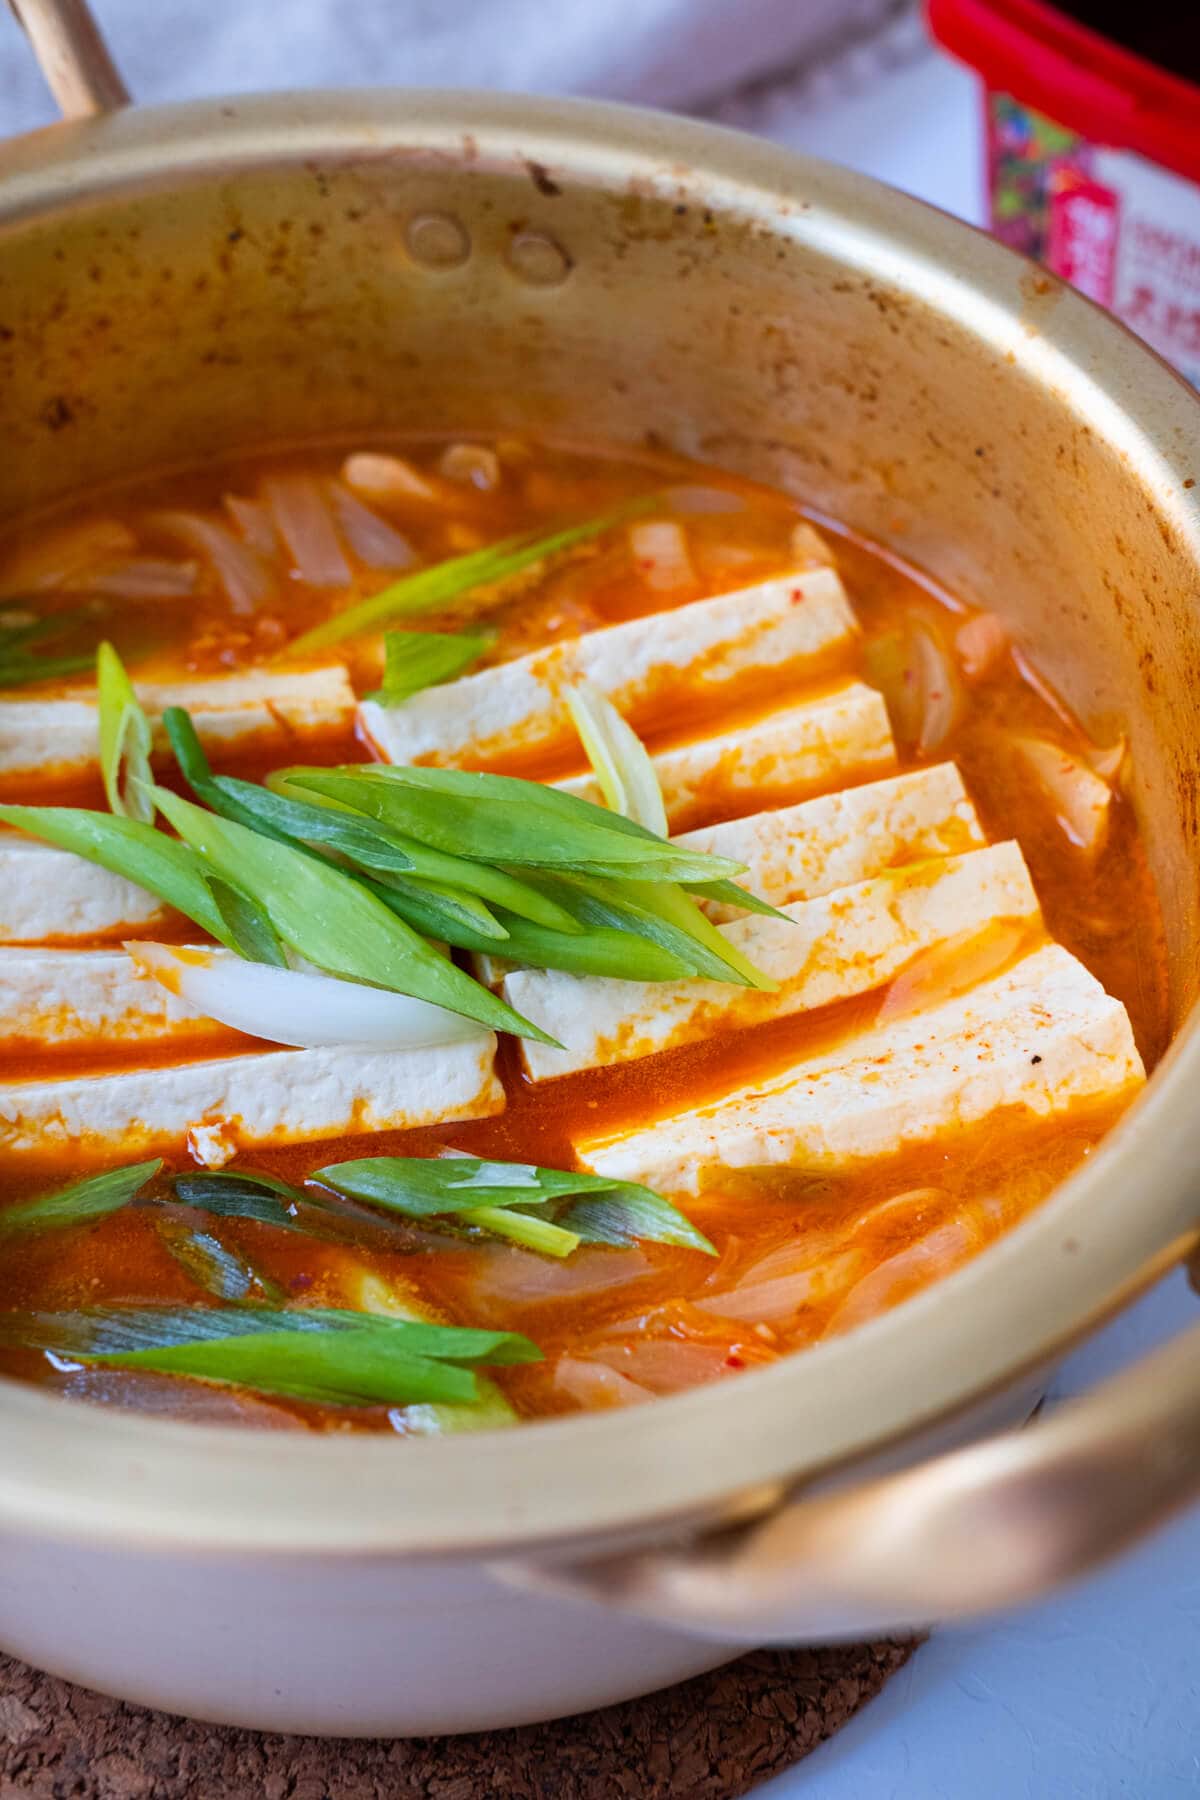 Red kimchi stew with firm tofu slices, pork belly and onion slices served in a metal pot with handles.